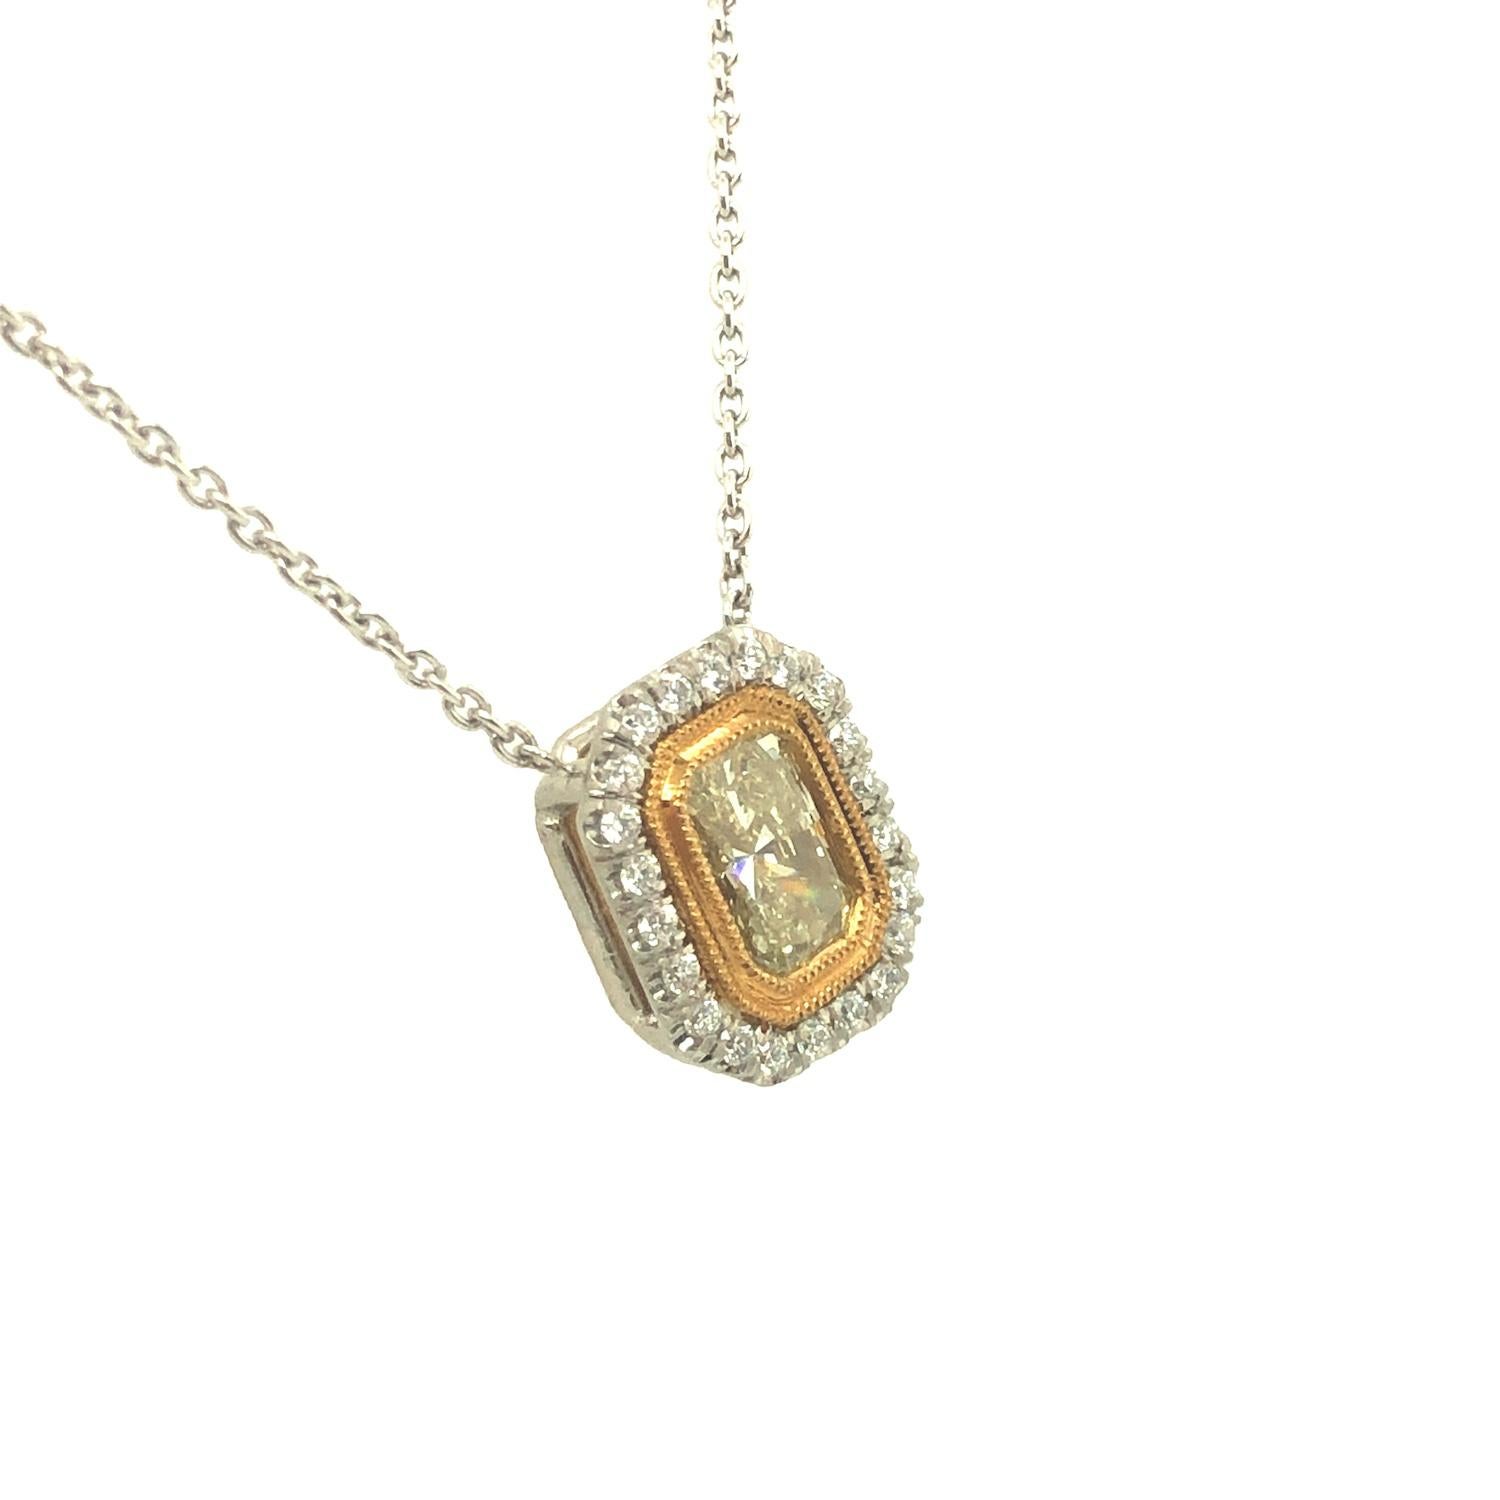 Gems Are Forever 0.81 Ct Yellow Diamond Halo Necklace 18K Yellow Gold Platinum In New Condition For Sale In beverly hills, CA